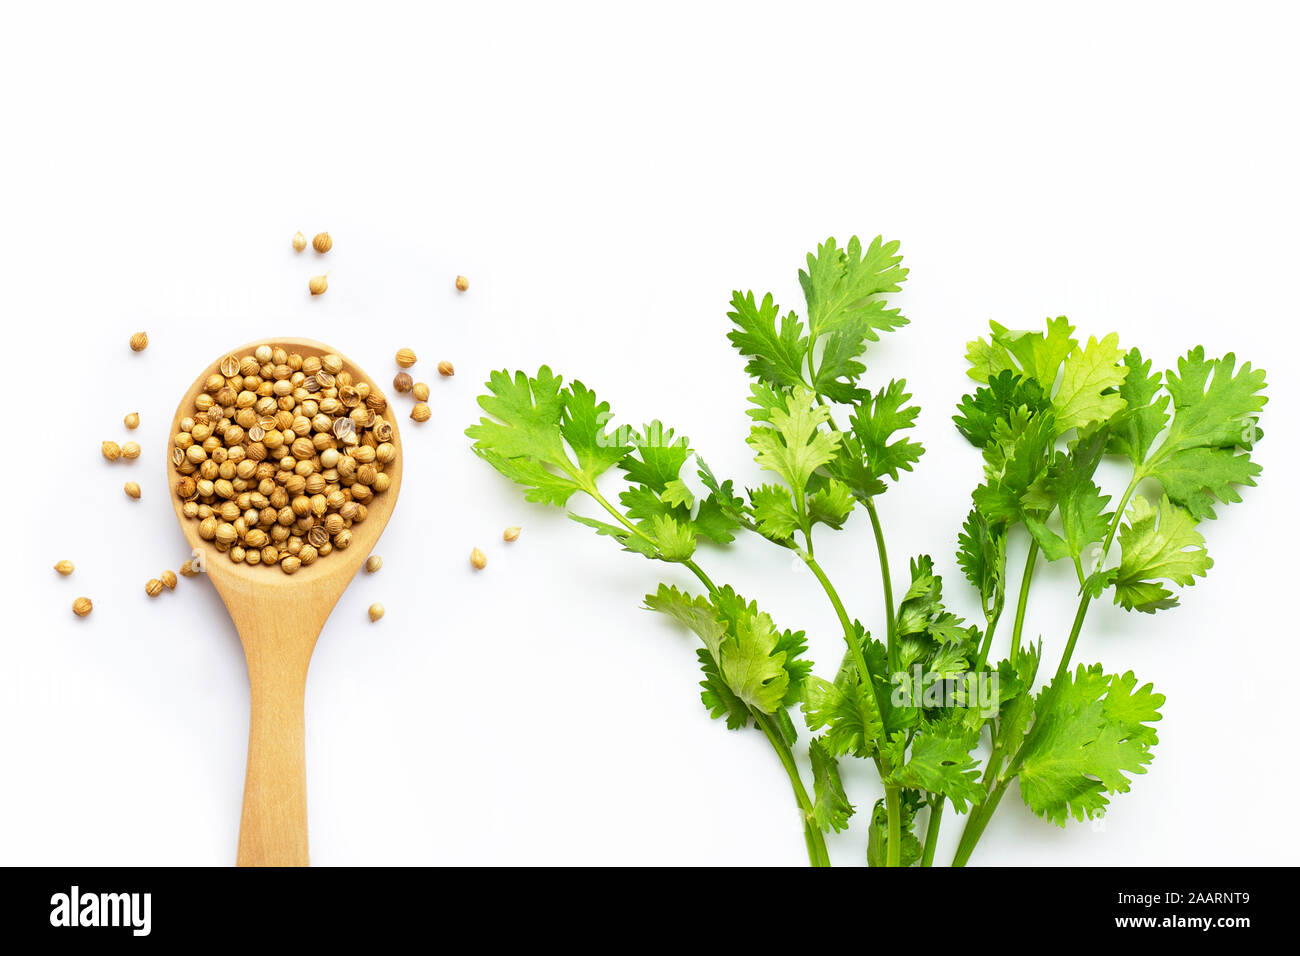 Coriander seeds with fresh leaves isolated on white background. Stock Photo